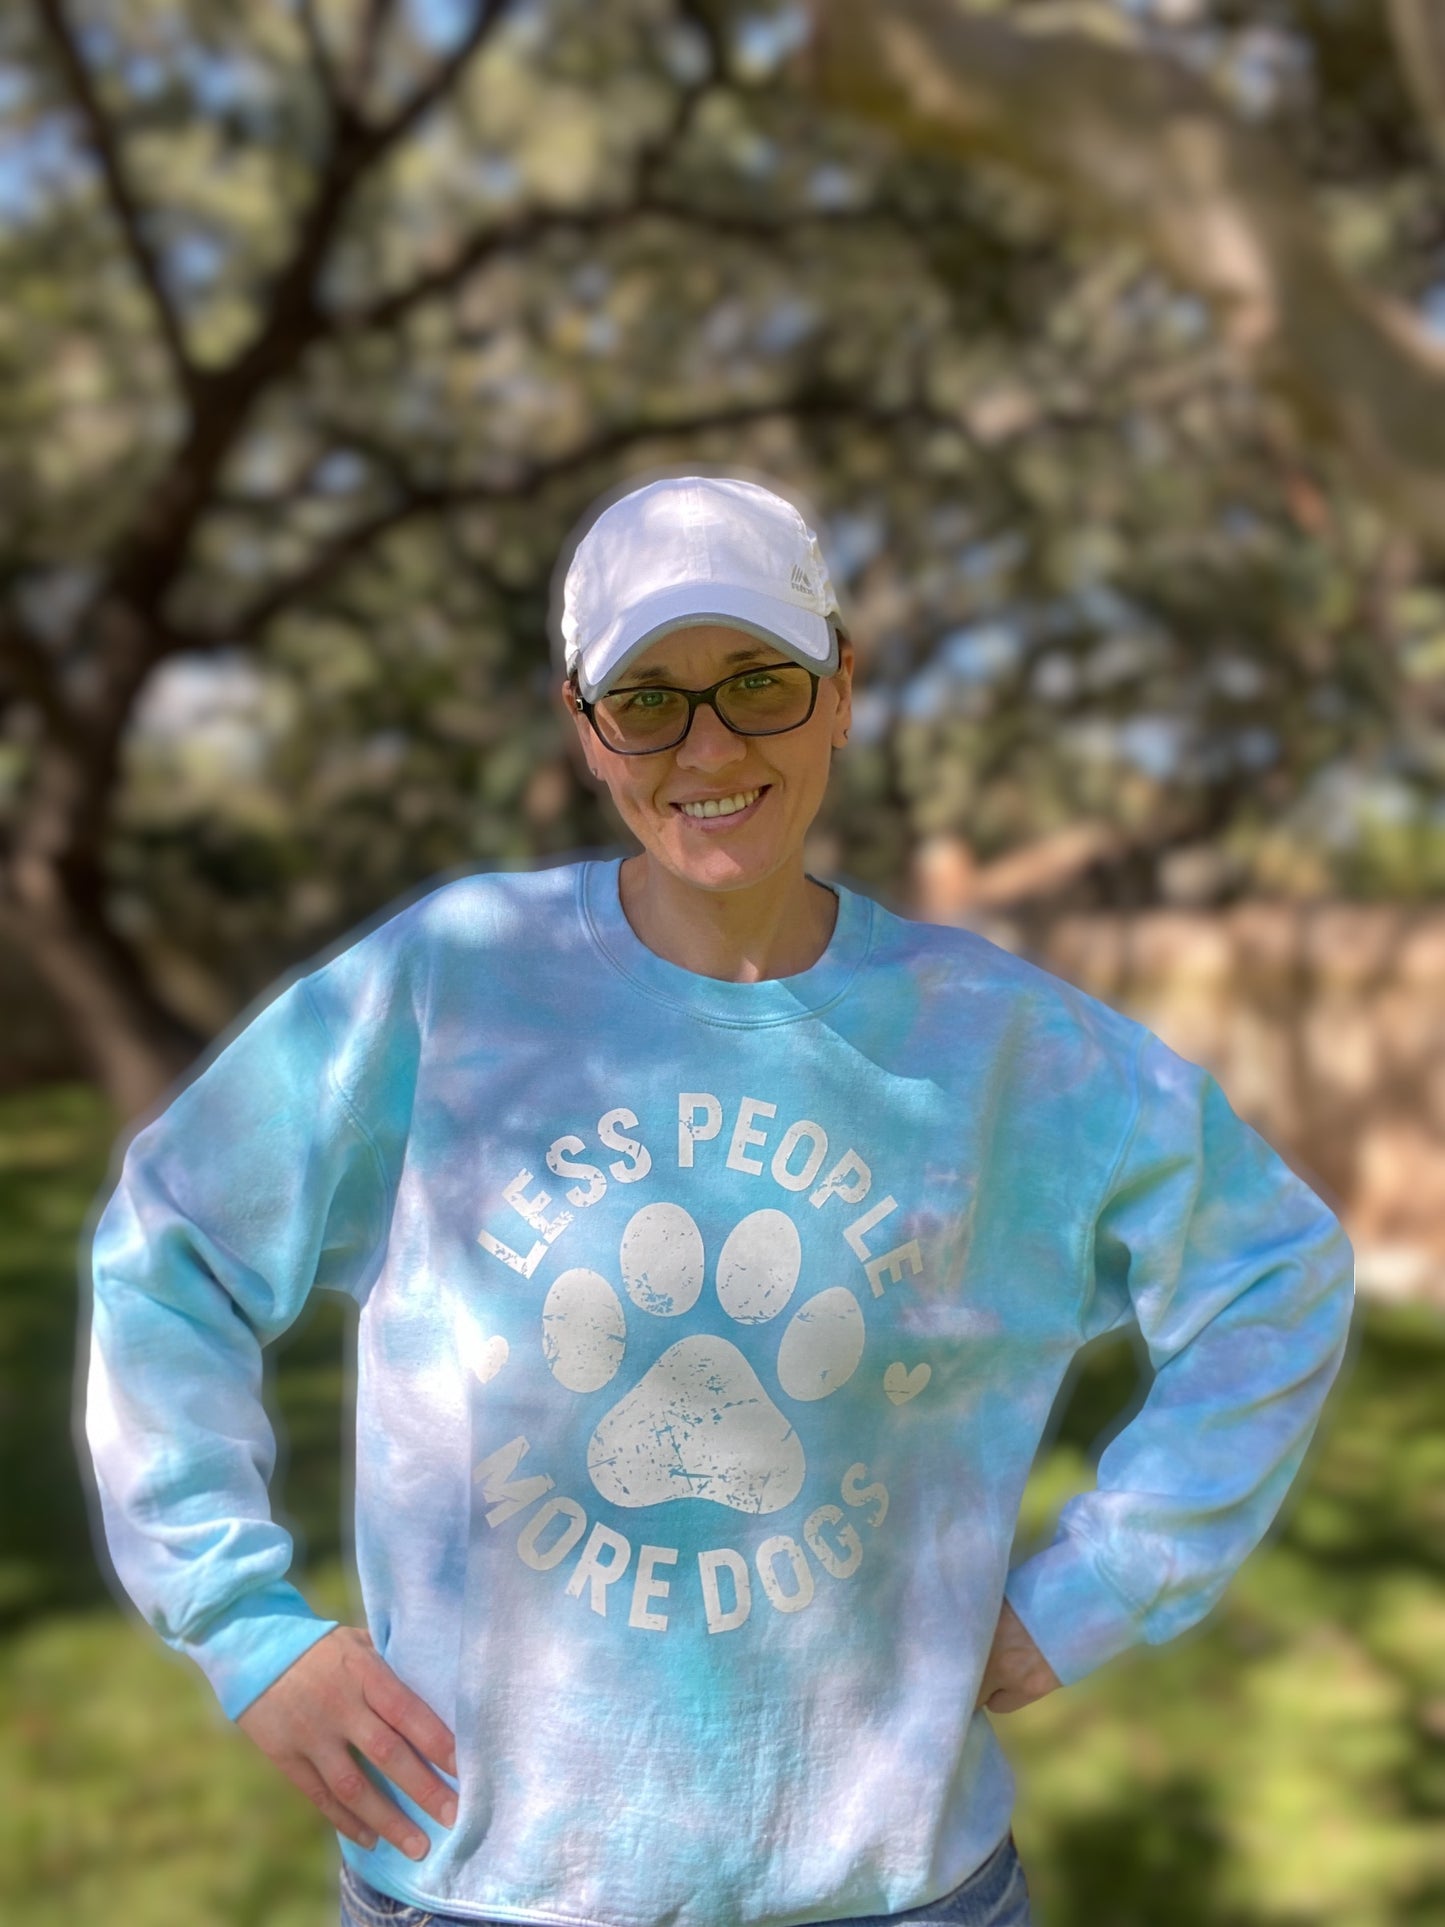 Less People More Dogs Tie Dye